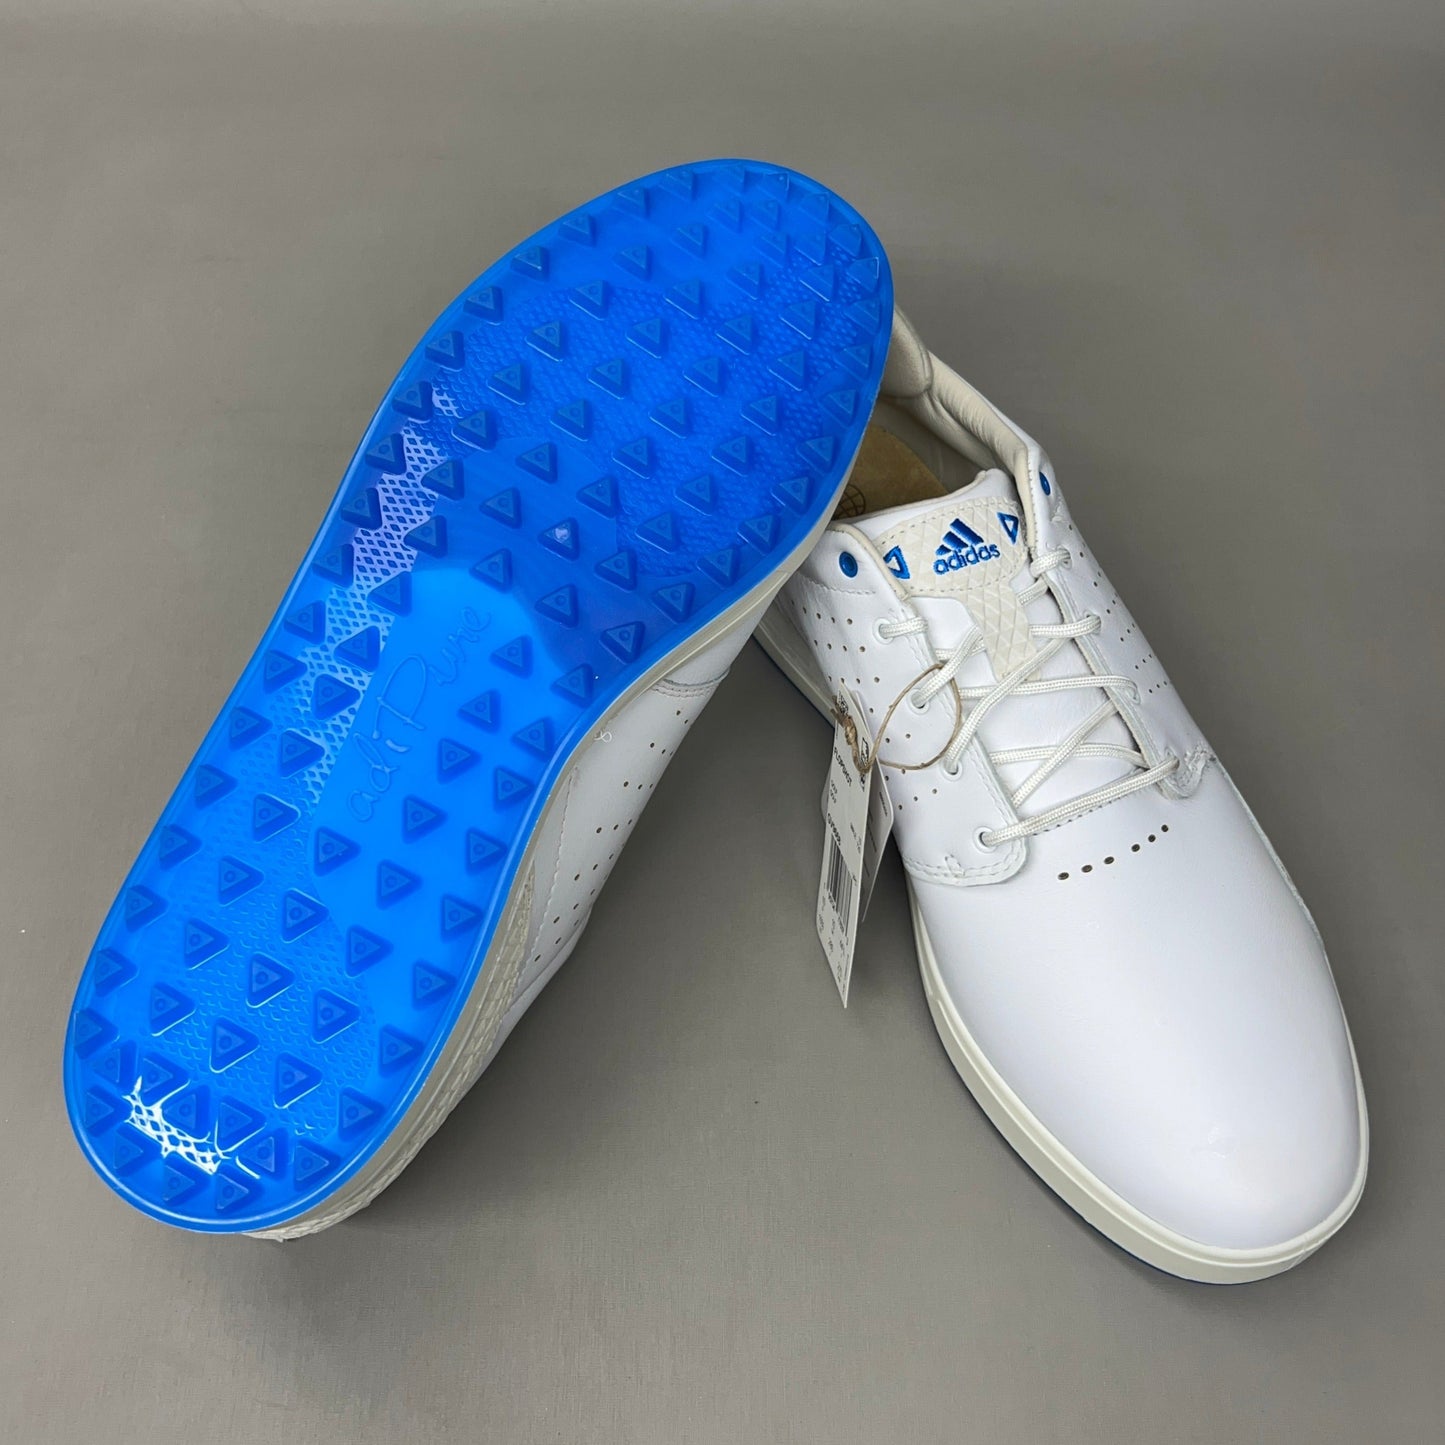 ADIDAS Flopshot Golf Shoes Waterproof Leather Men's Sz 11 White / Gold / Blue GV9668 (New)